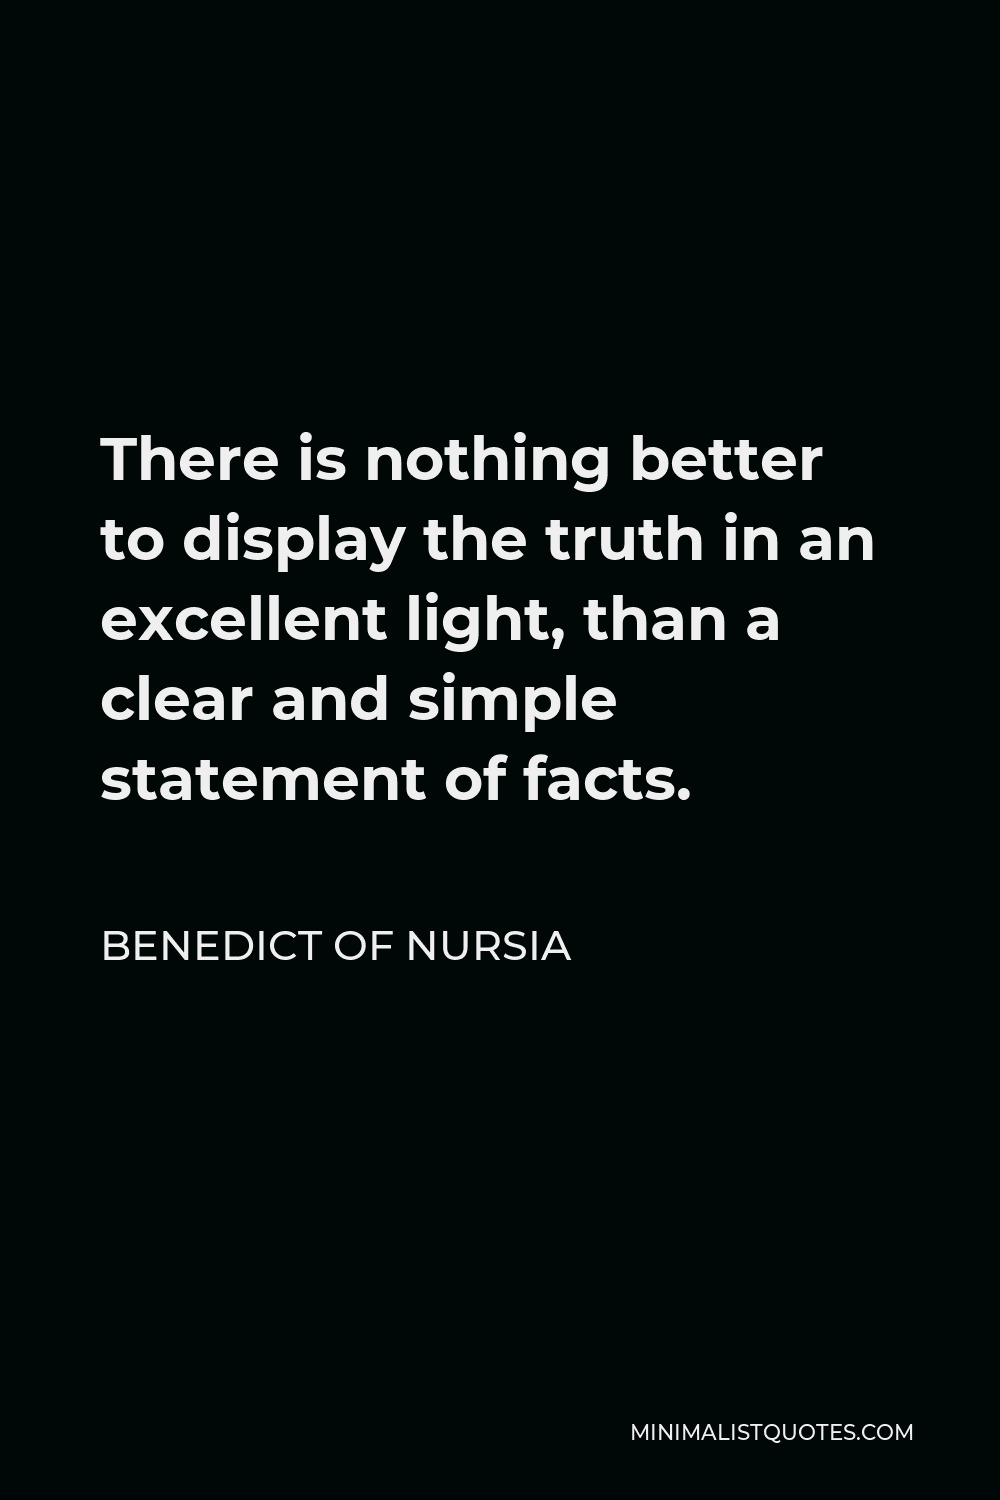 Benedict of Nursia Quote - There is nothing better to display the truth in an excellent light, than a clear and simple statement of facts.